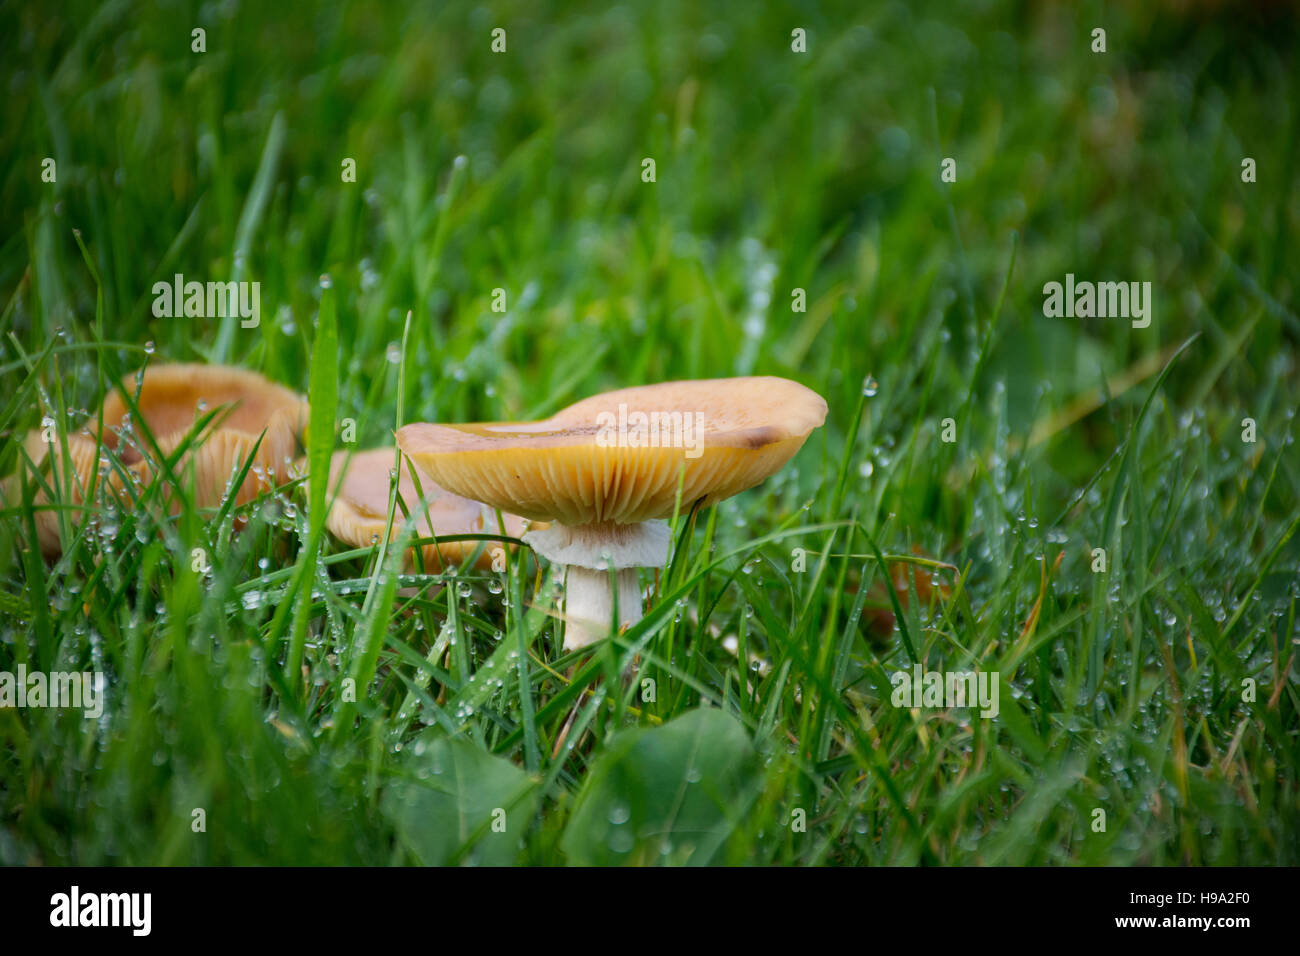 A closeup of mushroom in the gress, in low angle Stock Photo